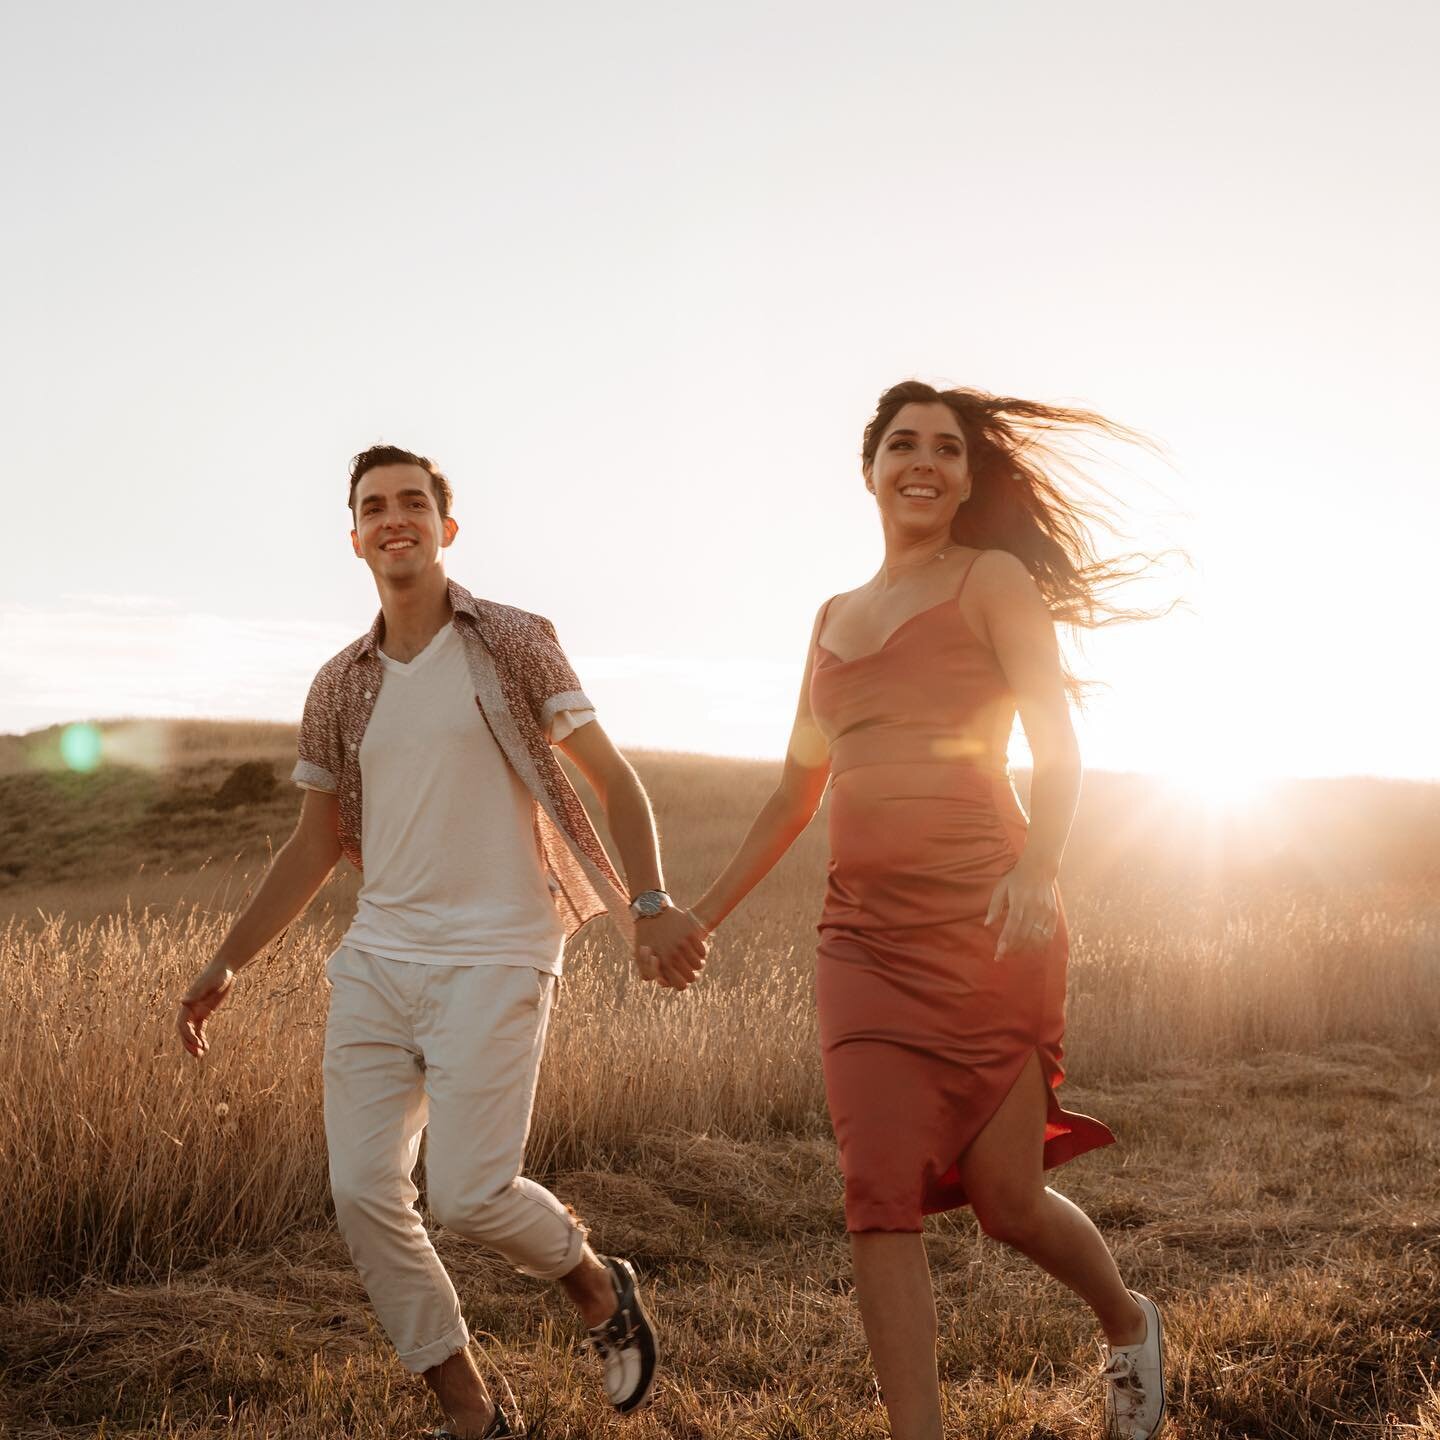 POV: You&rsquo;re running through a field on a cliff, overlooking a secluded beach, as the sun sets behind you and your best friend ♡

#melbournecouple #melbournewedding #melbourneweddingphotographer #engagementshoot #morningtonpeninsula #morningtonp